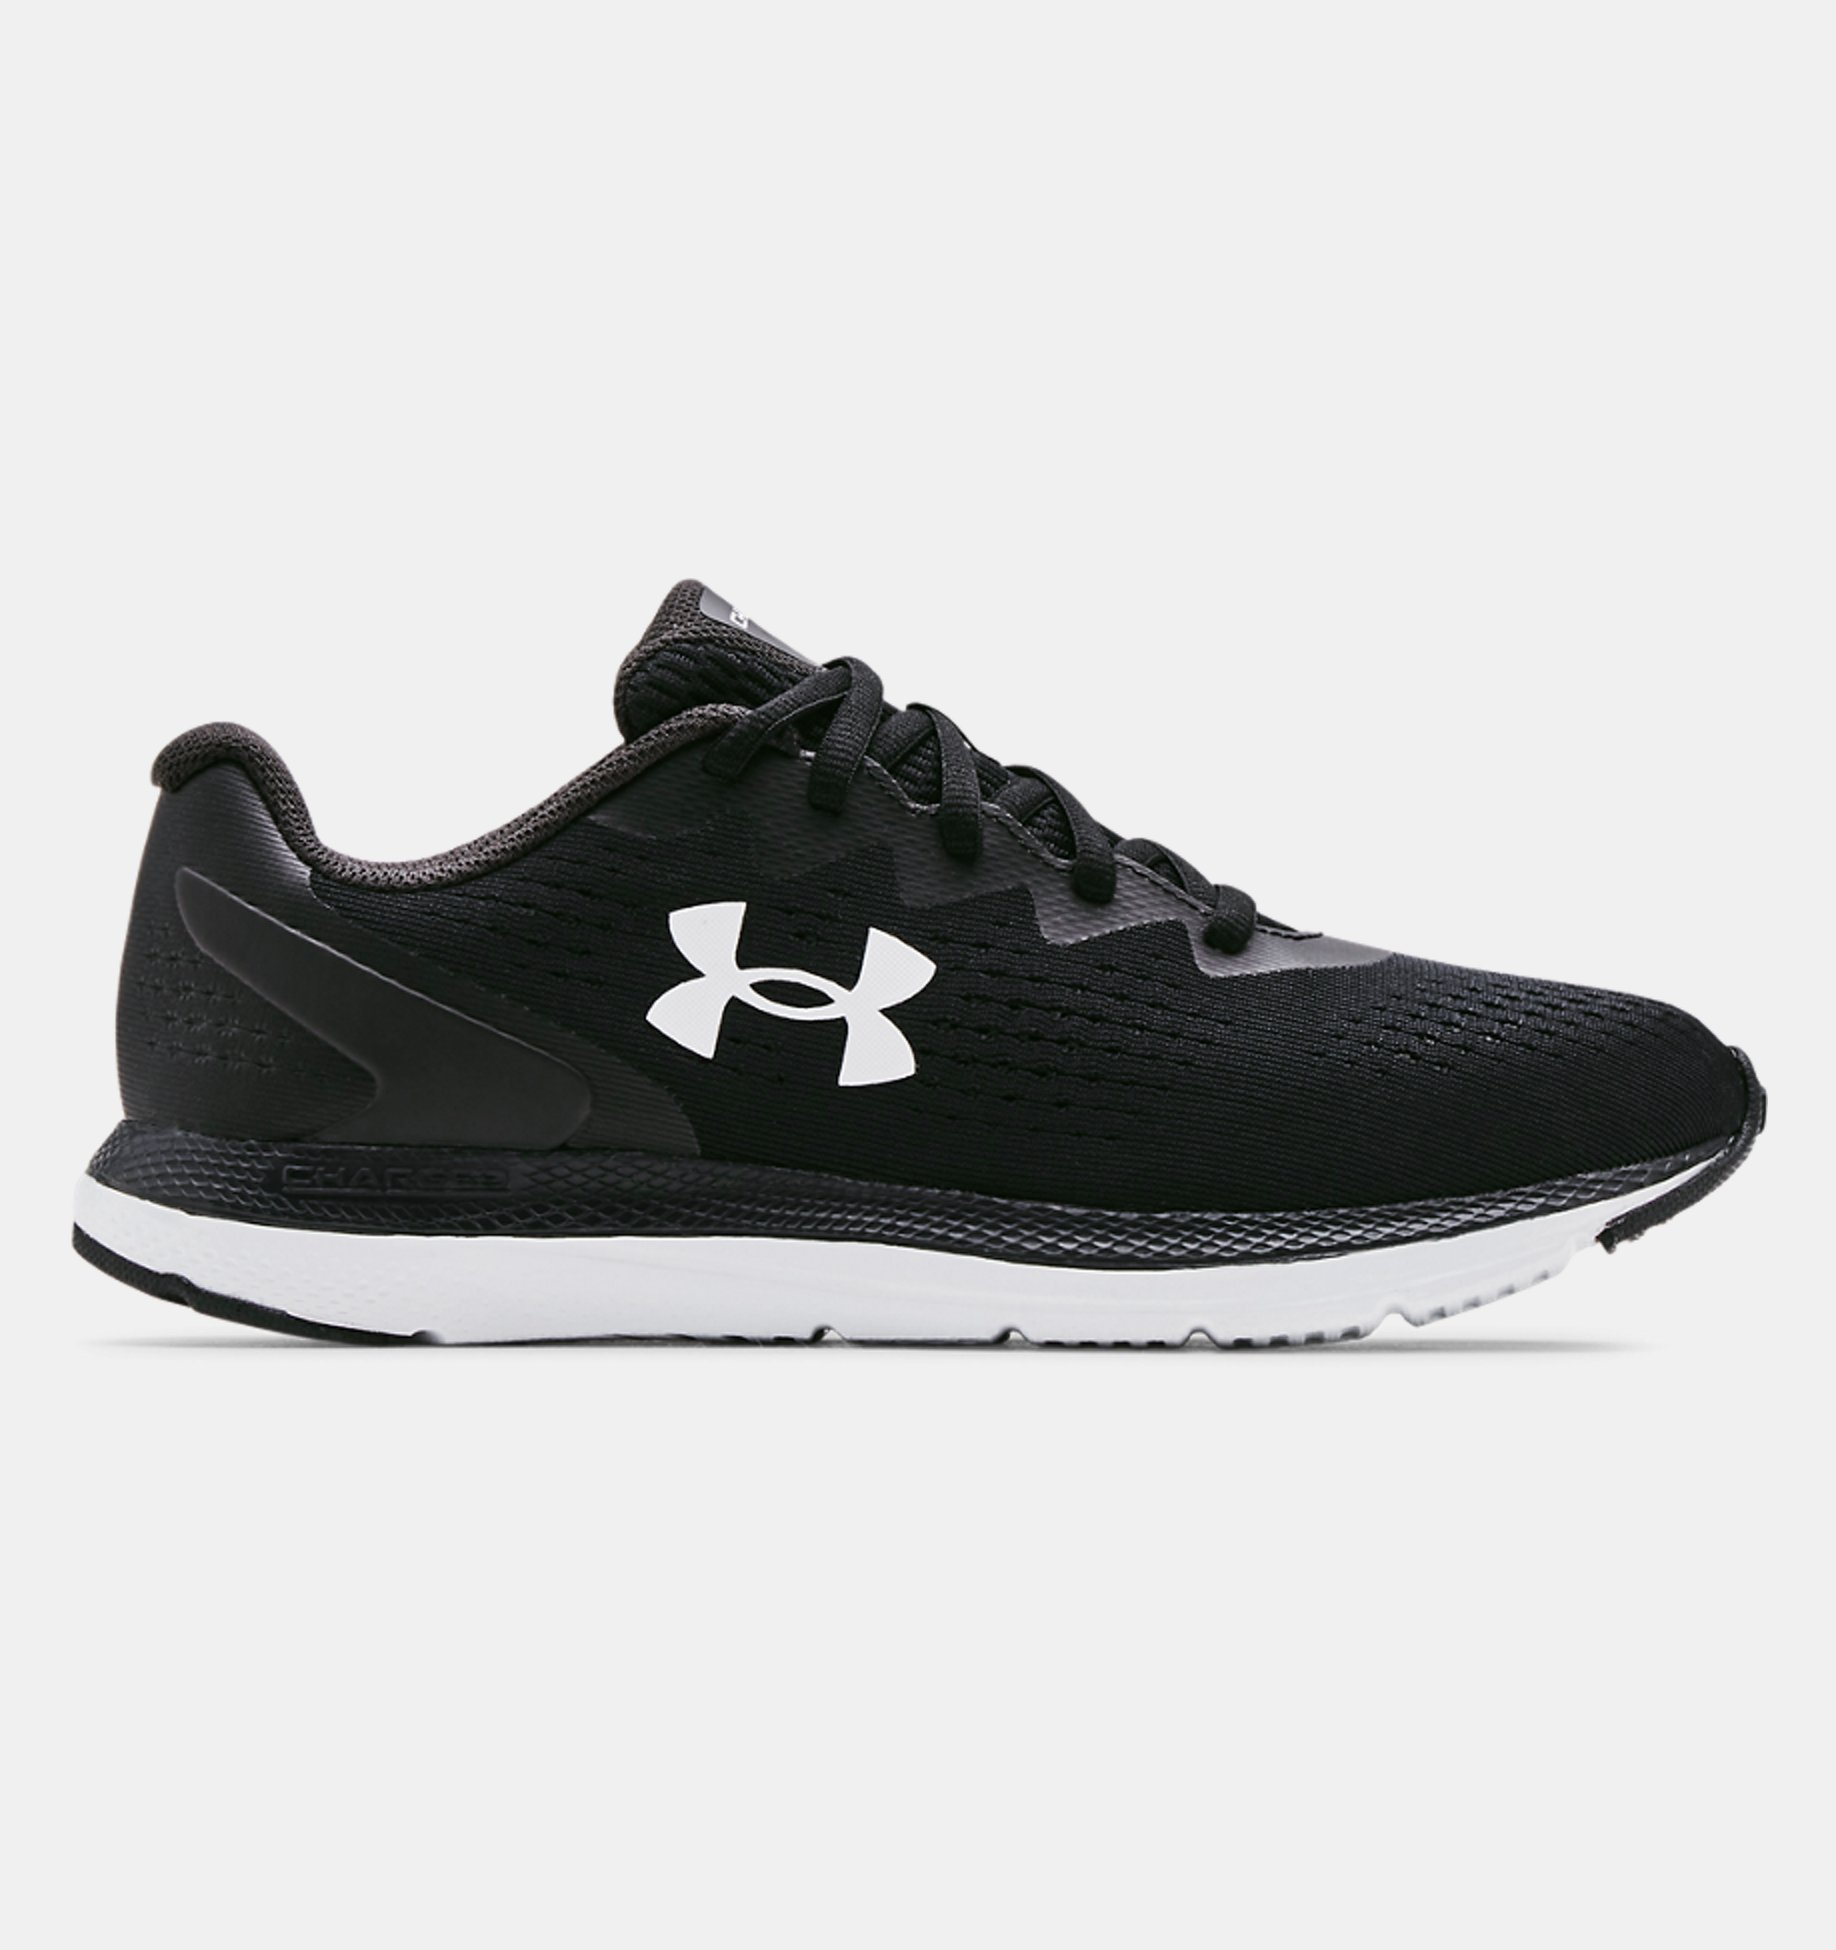 Under Armour 3021971 Women's UA Charged Toccoa 2 Hiking Athletic Running Shoes 